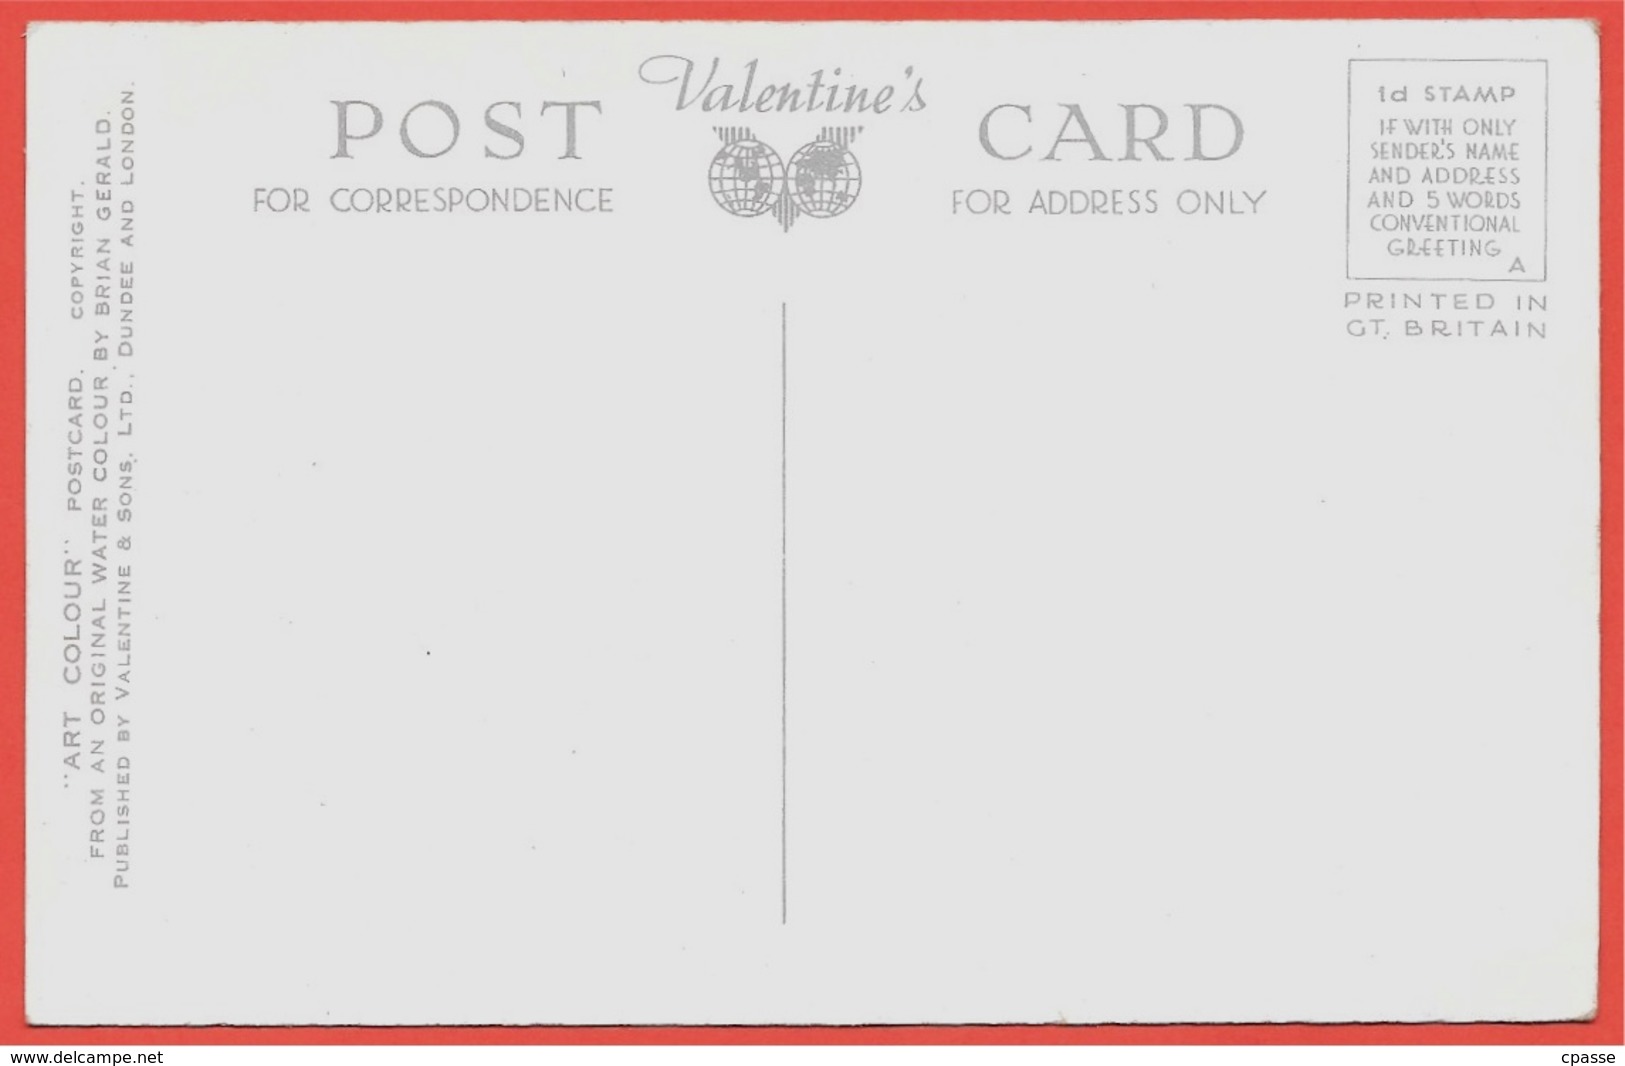 CPA Post Card Royaume-Uni UK - Scotland - ST ANDREWS - The HARBOUR ° Valentine's Brian Gerald - Fife